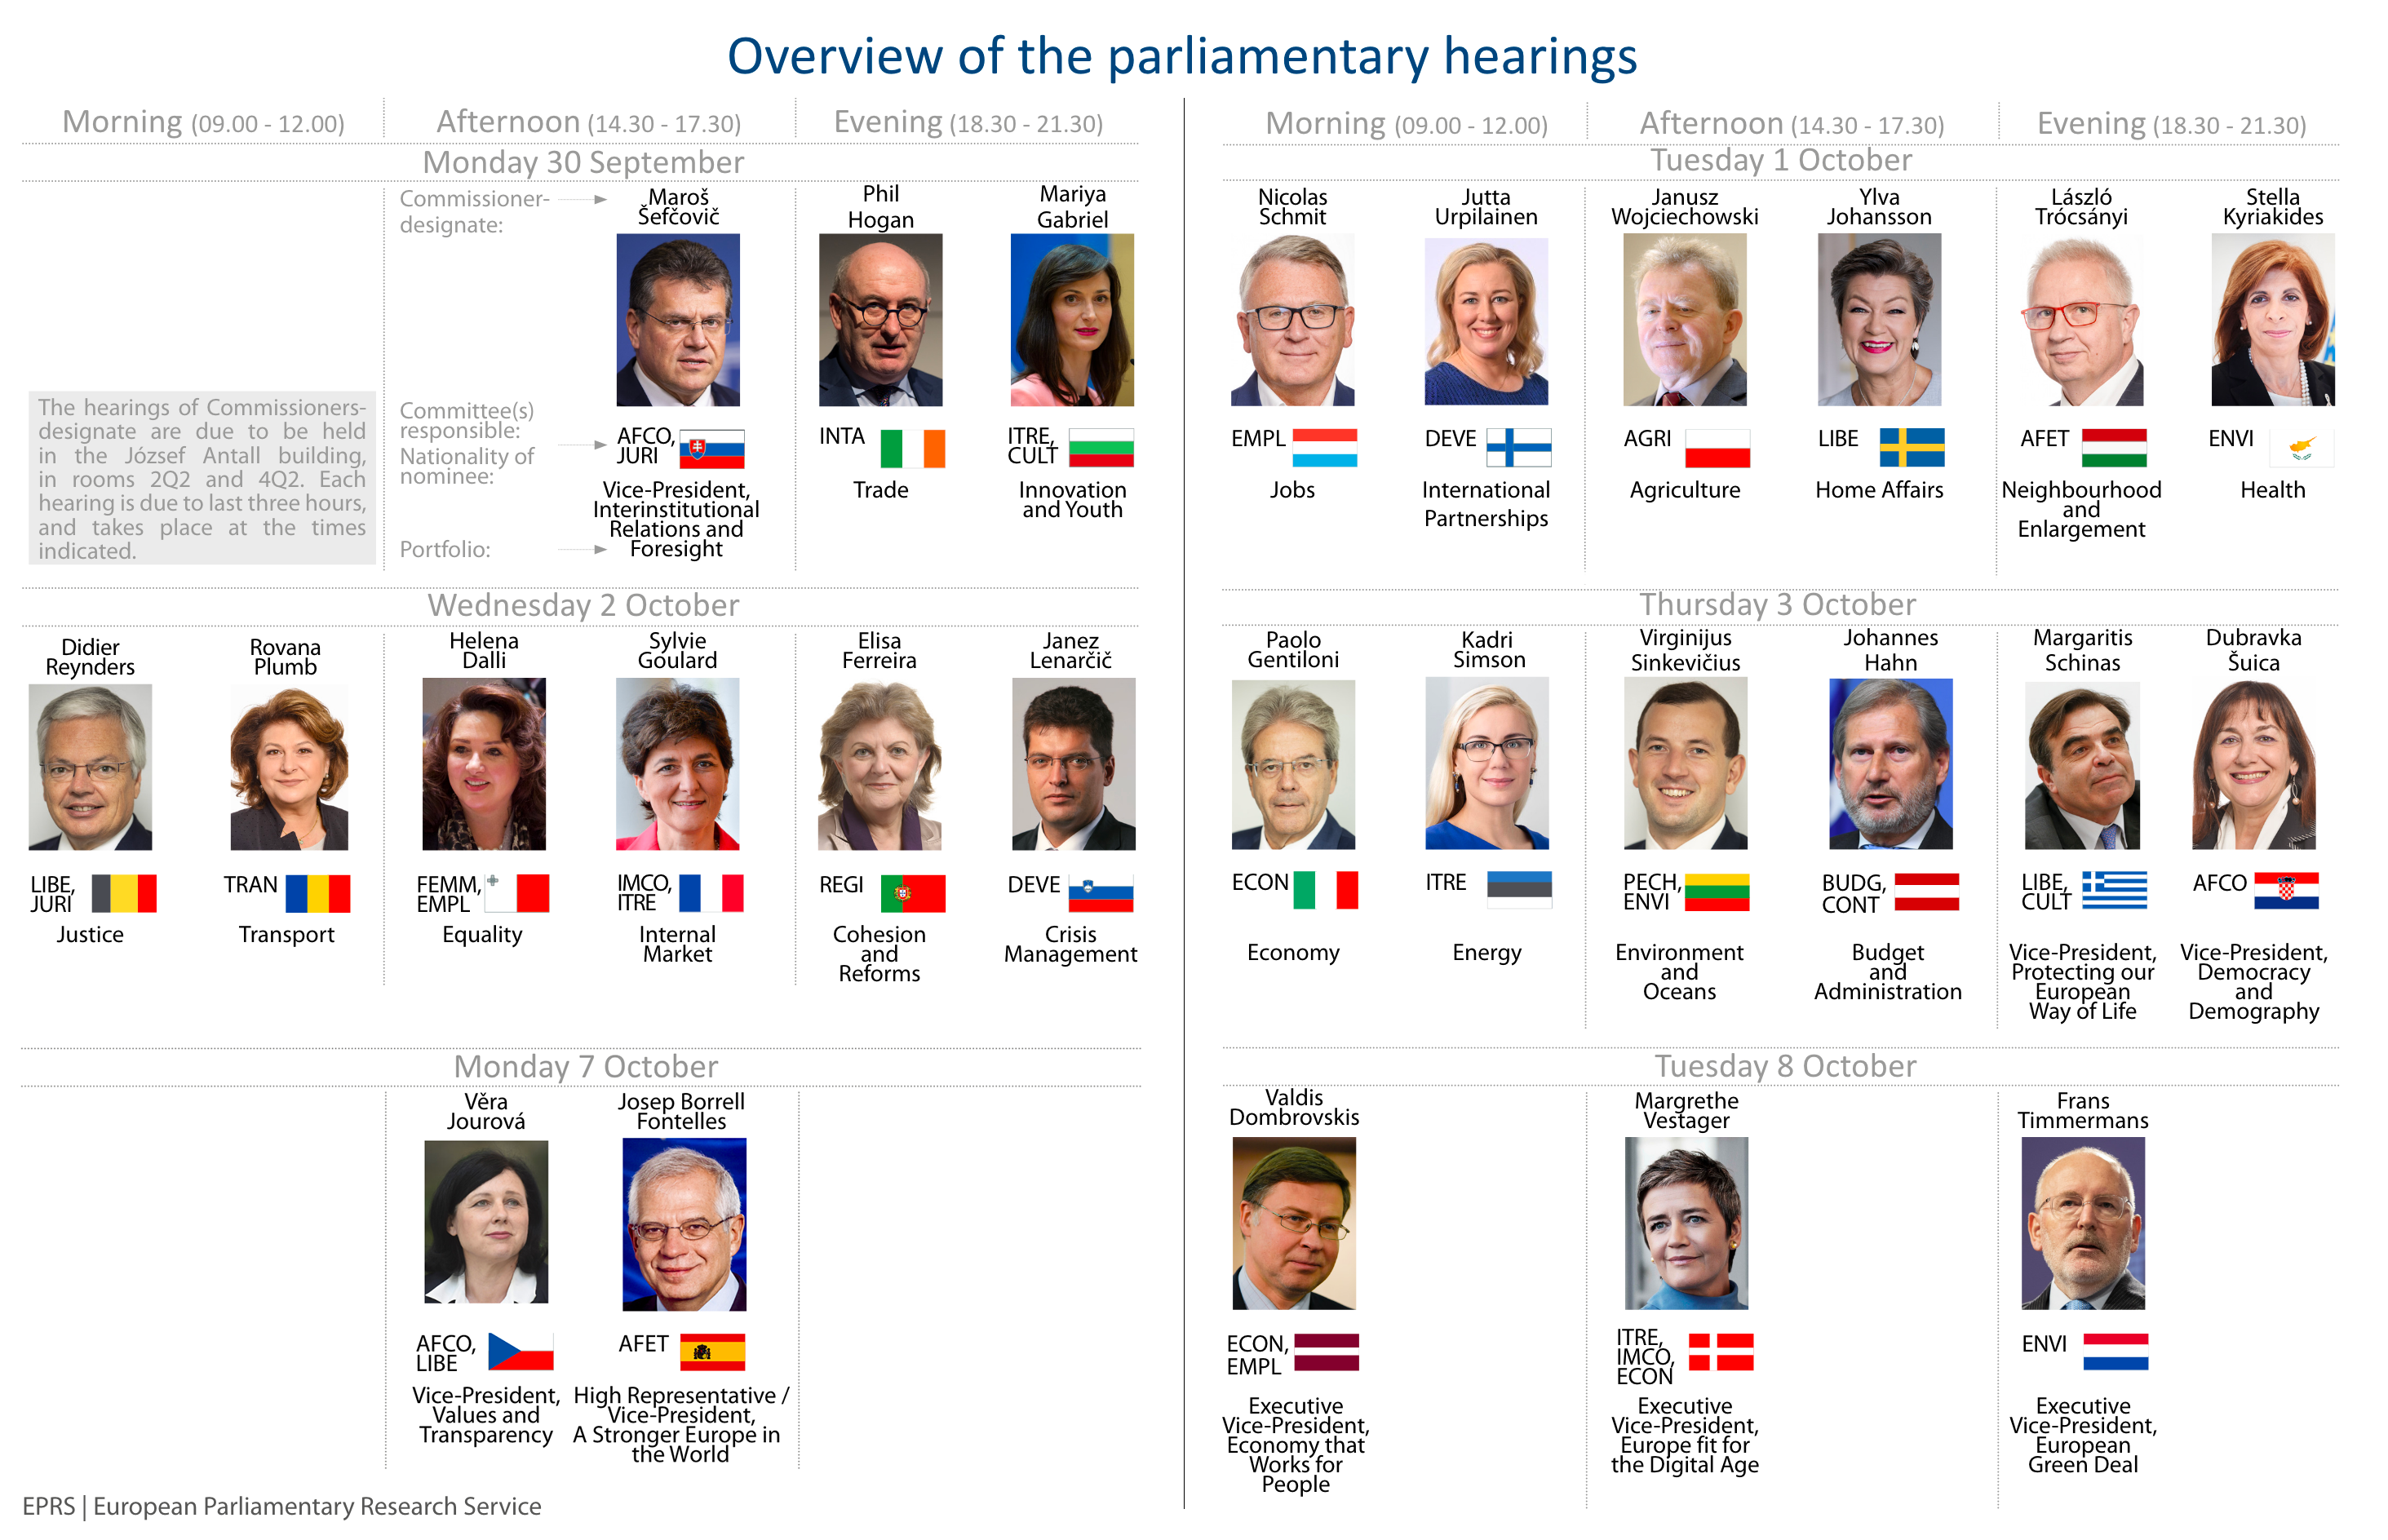 #EPhearings2019: Learn about the portfolios of Commissioners-designate